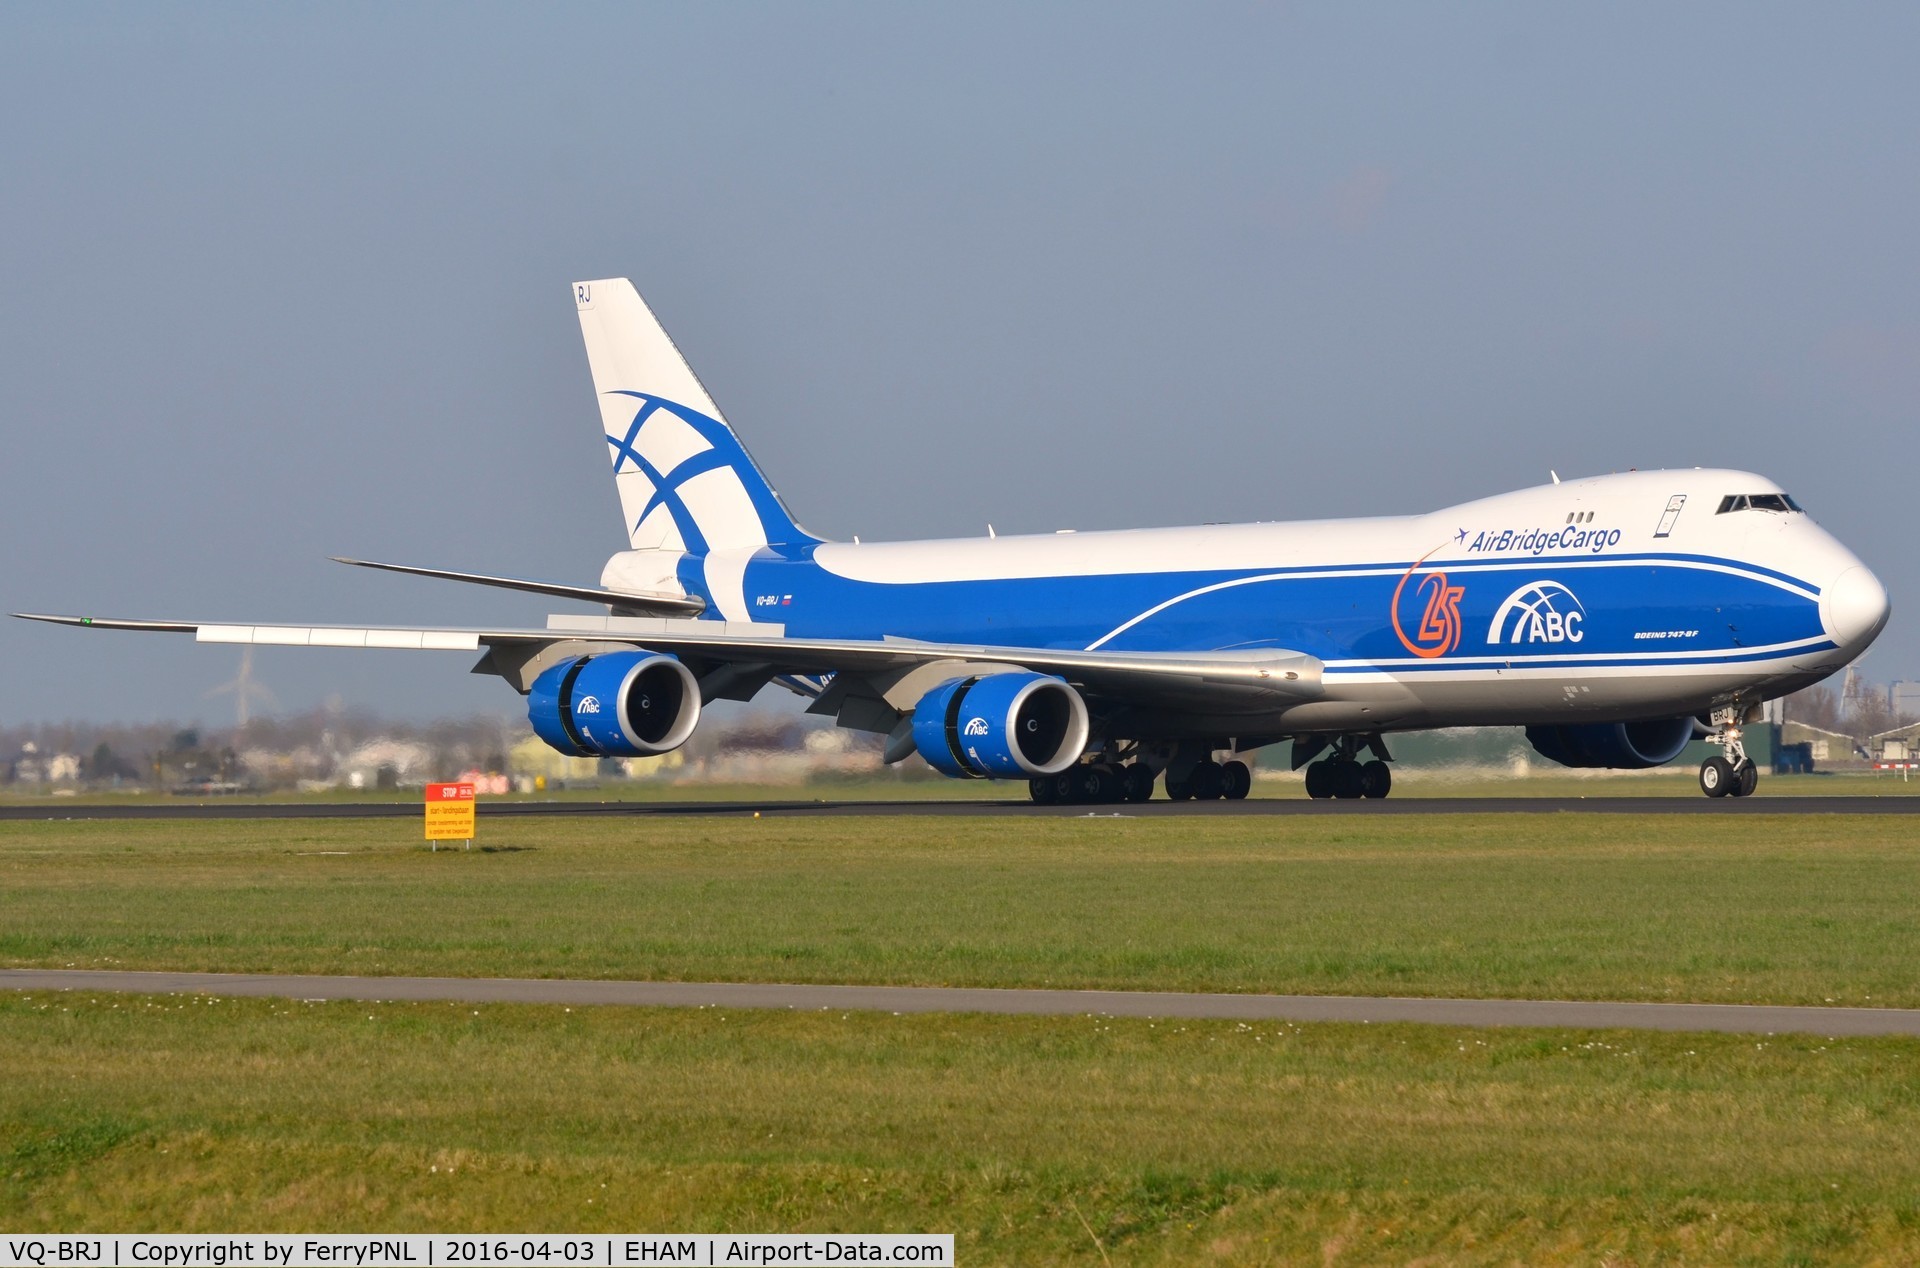 VQ-BRJ, 2013 Boeing 747-8HVF C/N 37670, ABC B748 Freighter arriving in AMS from the USA, Chicago.